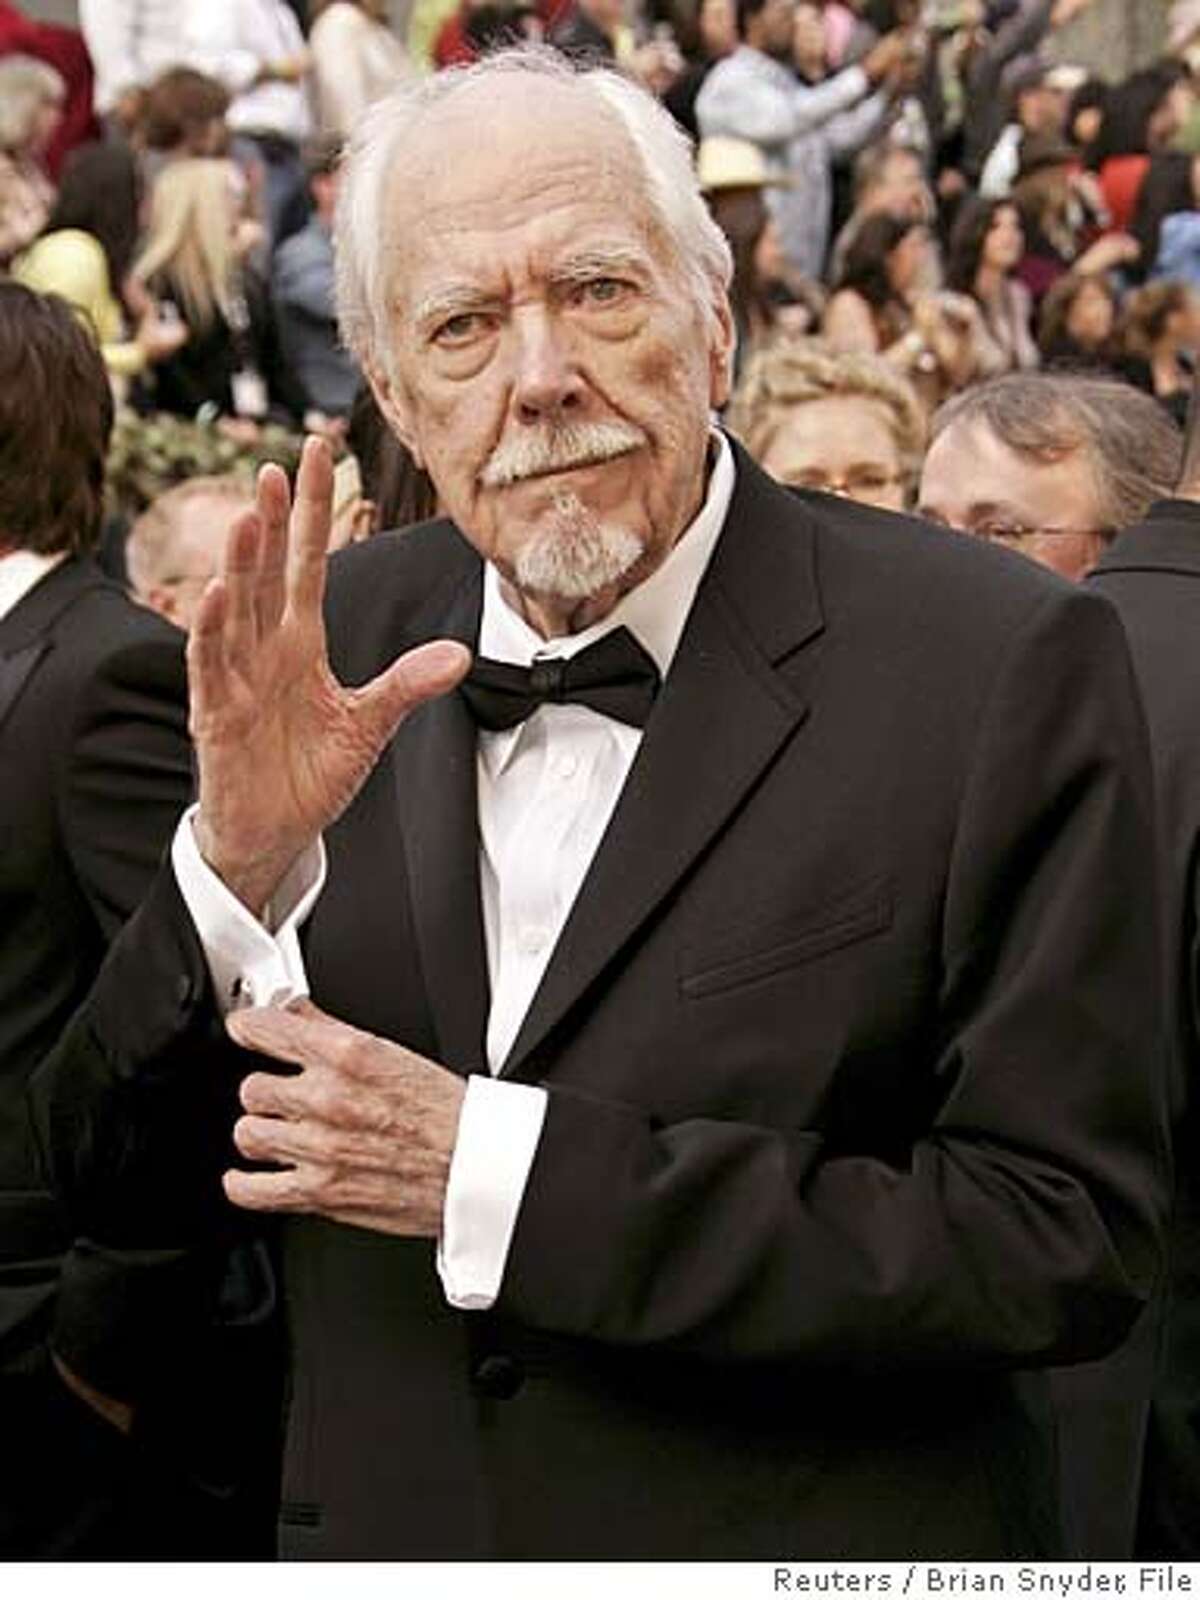 Director Robert Altman arrives at the 78th annual Academy Awards at the Kodak Theatre in Hollywood, California in this March 5, 2006 file photo. Altman has died in a Los Angeles hospital, a spokesman for his production company said on November 21, 2006. The spokesman told Reuters that Altman, 81, died on November 20 evening. REUTERS/Brian Snyder/Files (UNITED STATES)